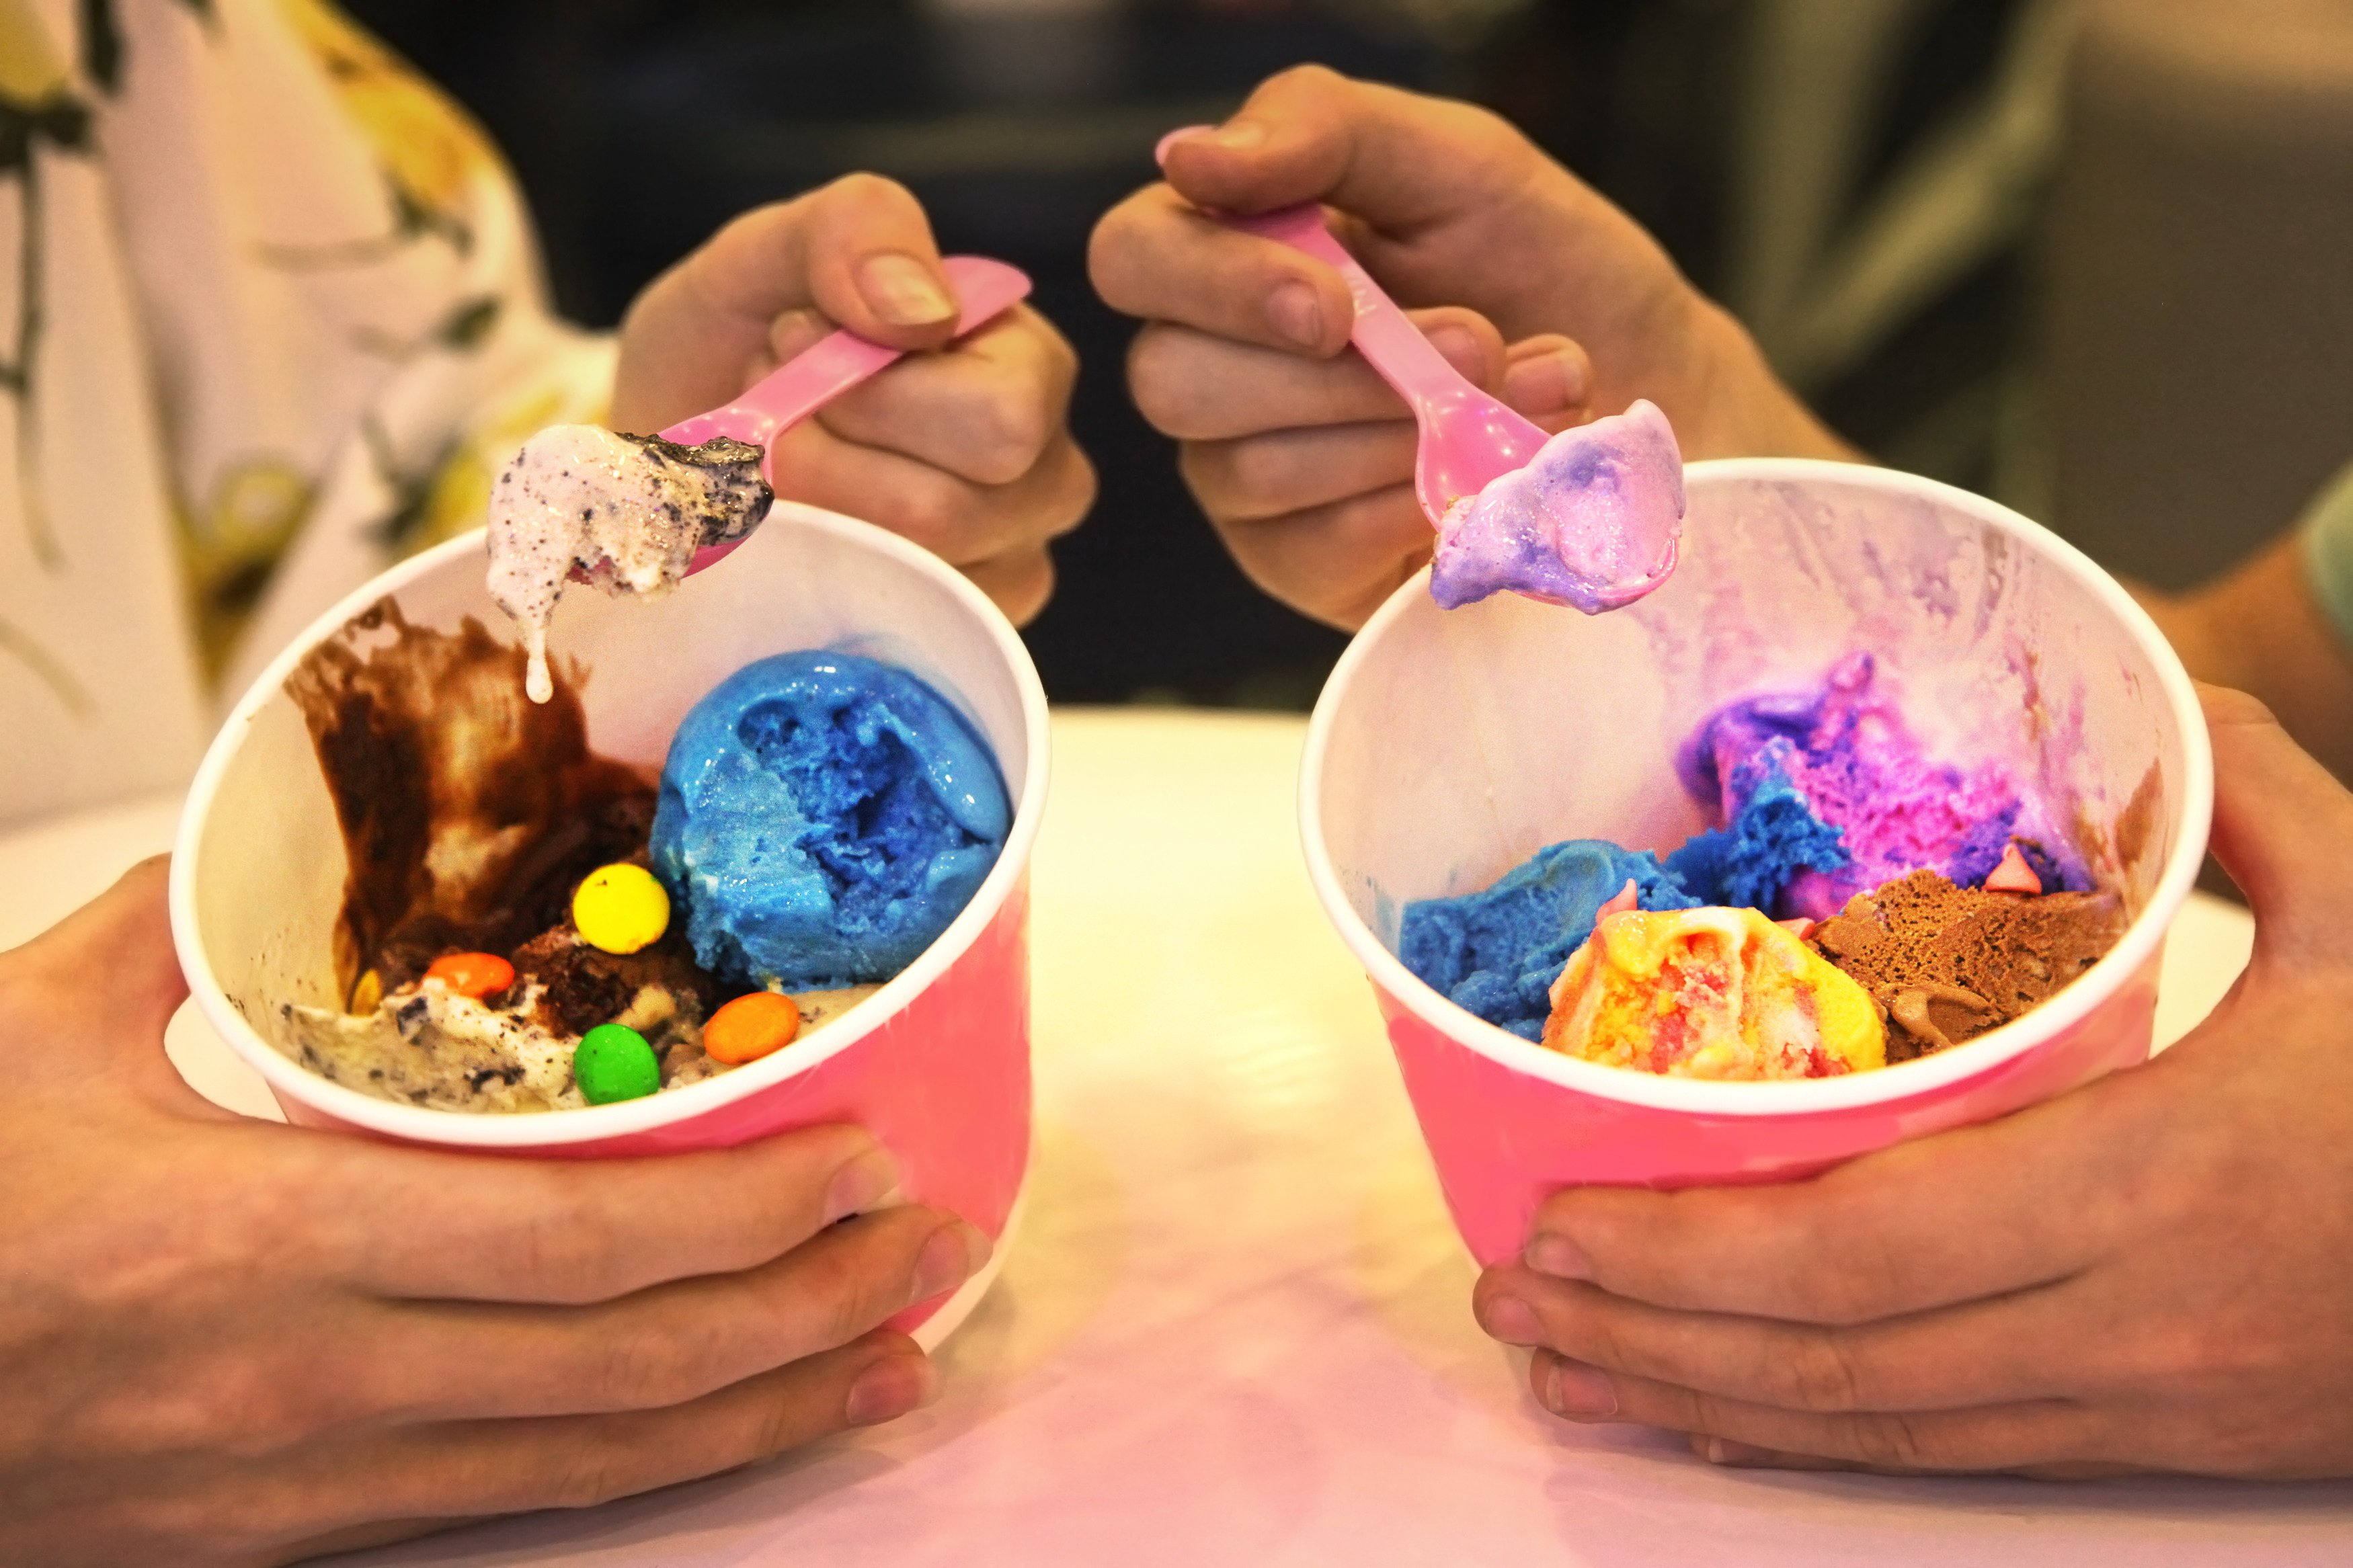 A new Baskin-Robbins store in Seoul features flavours created by a new AI-based product development system. Photo: Shutterstock